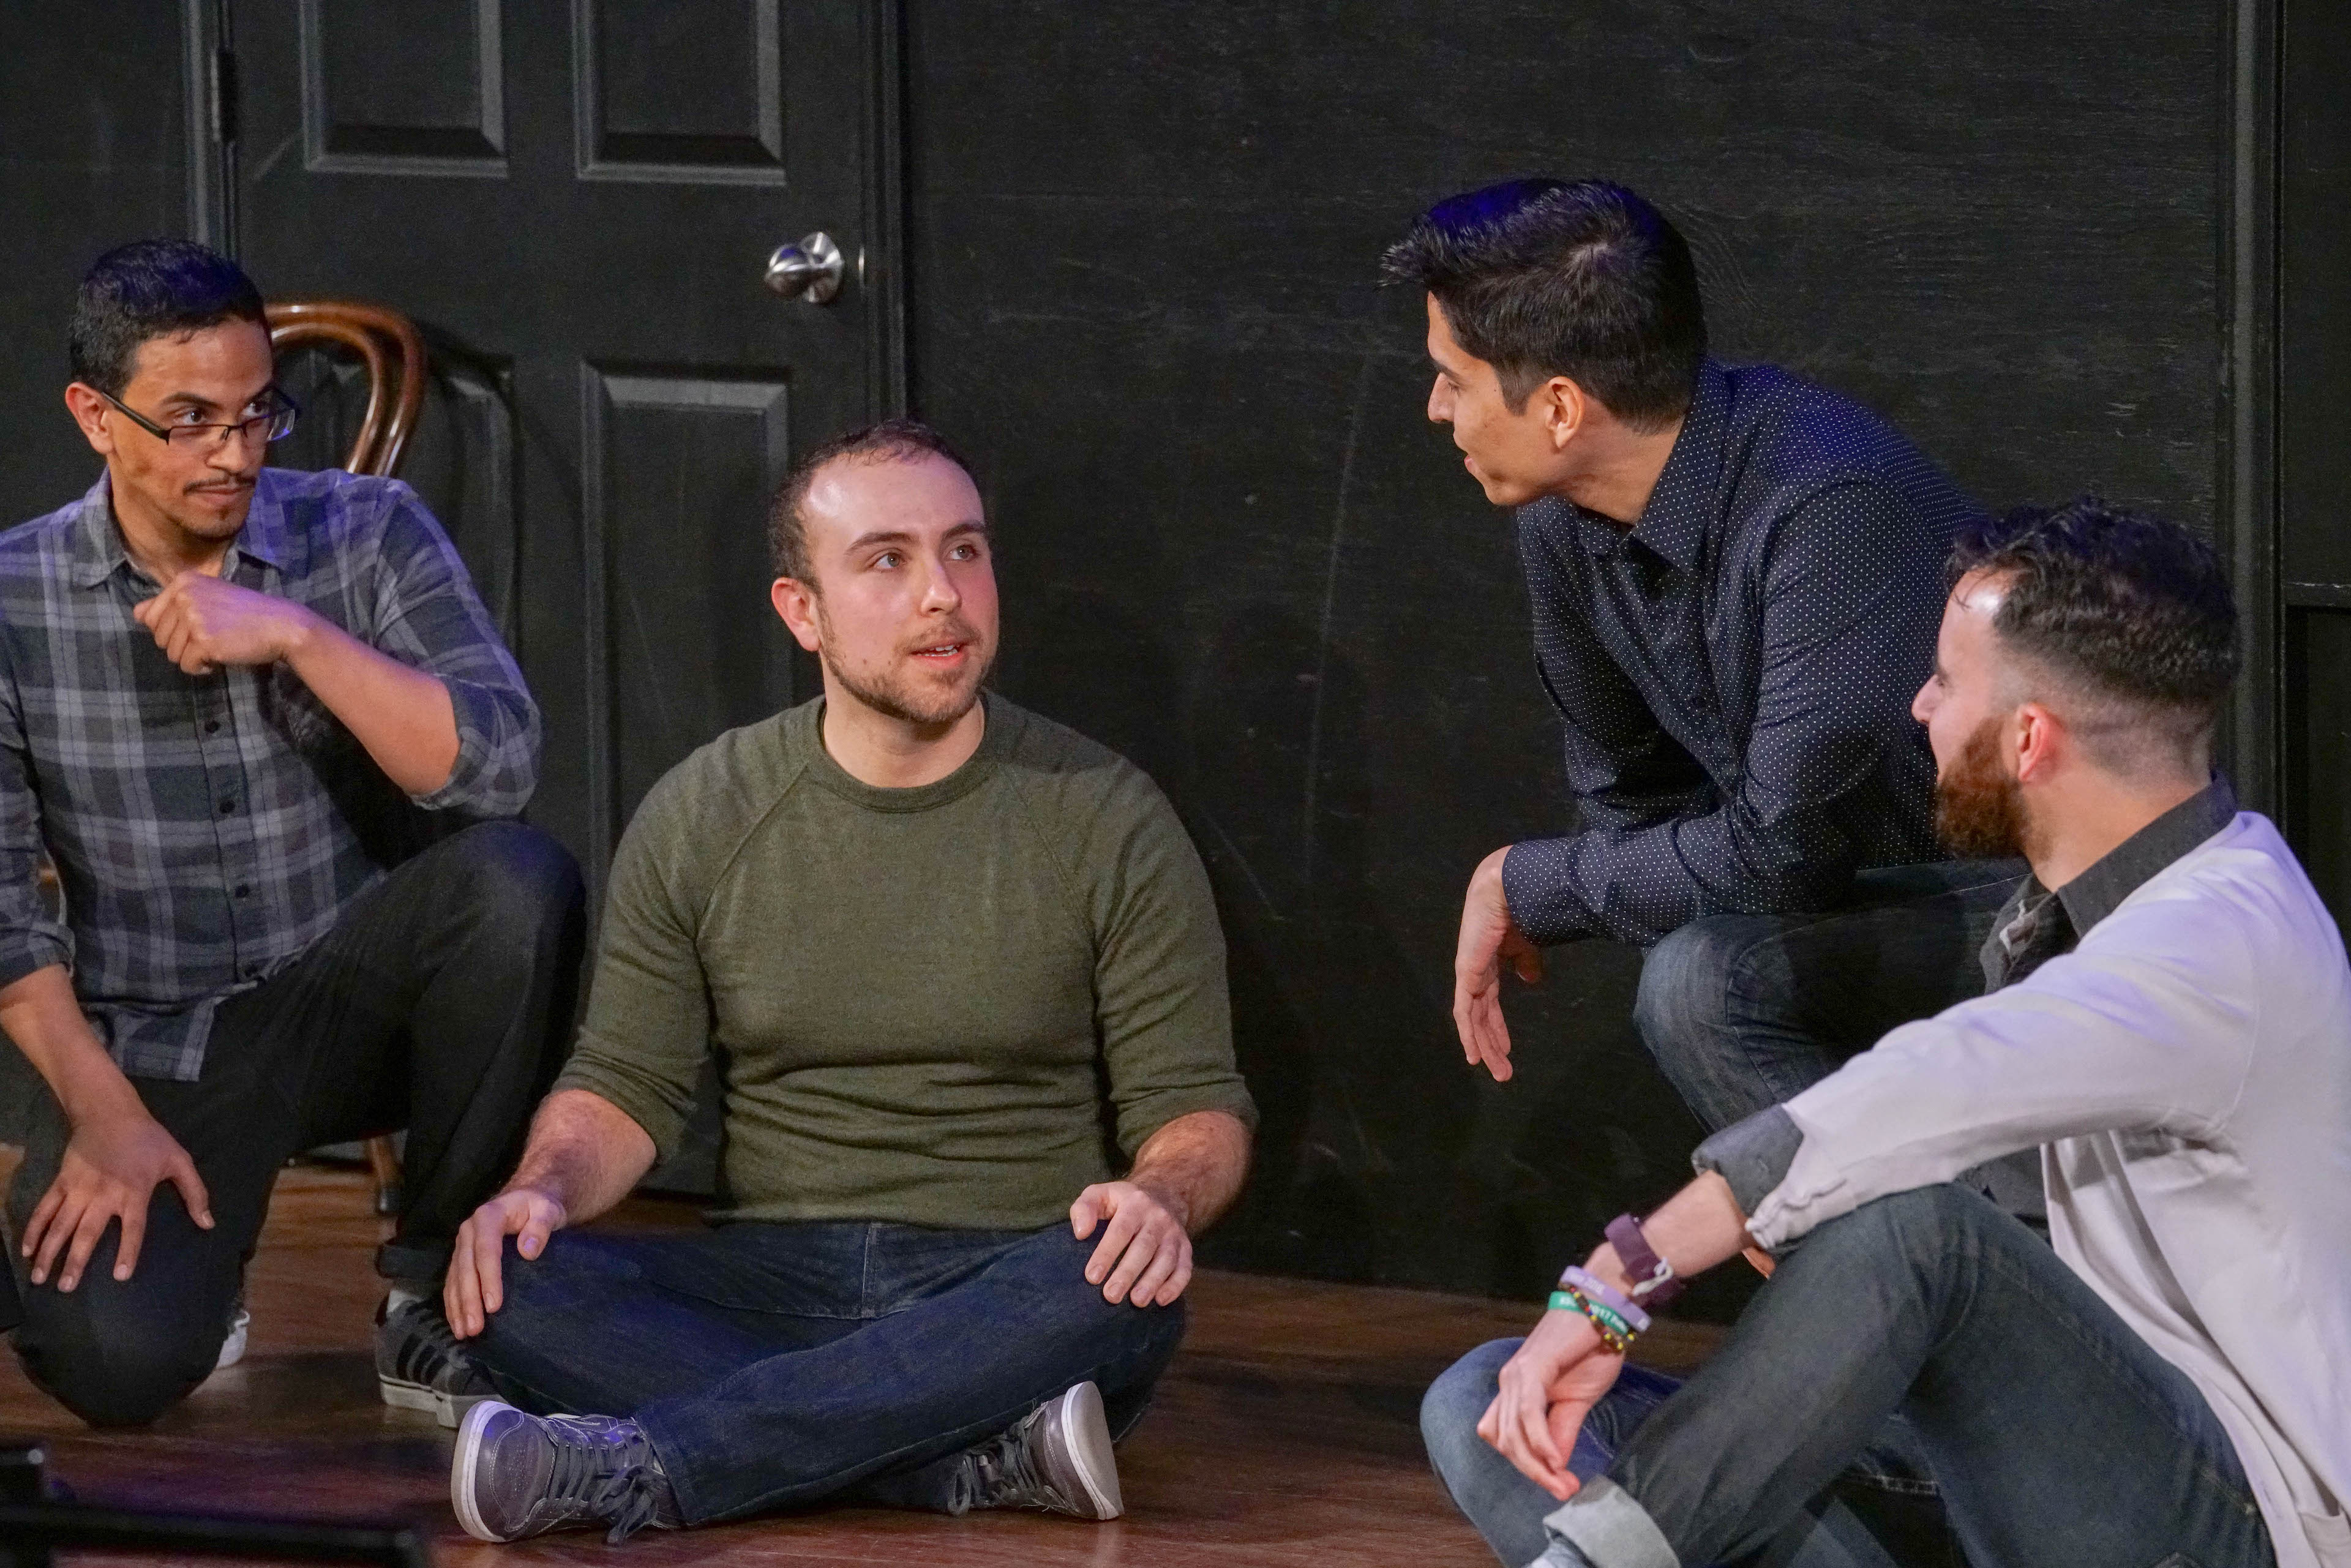 The performers sit or crouch on the stage’s wooden floor. Adam, Paul, and Devin look at Alex, whose body is angled toward the camera. Behind the performers is the black wall of the stage, with a part of a black door visible in the frame.